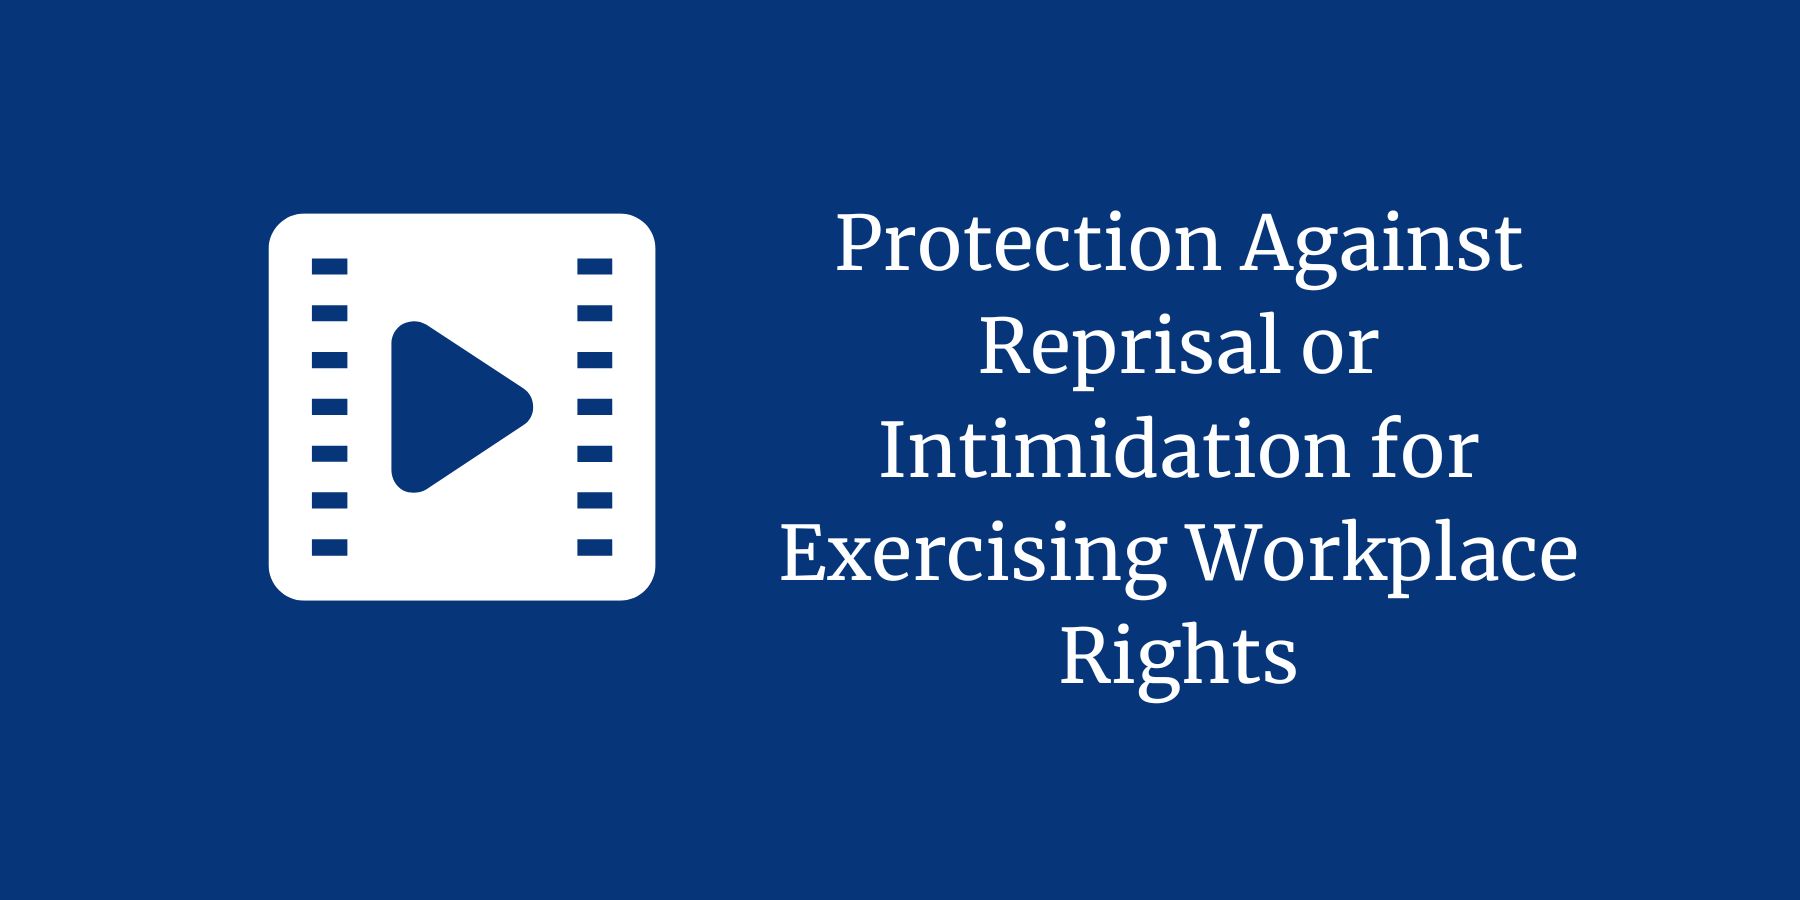 Protection Against Reprisal or Intimidation for Exercising Workplace Rights